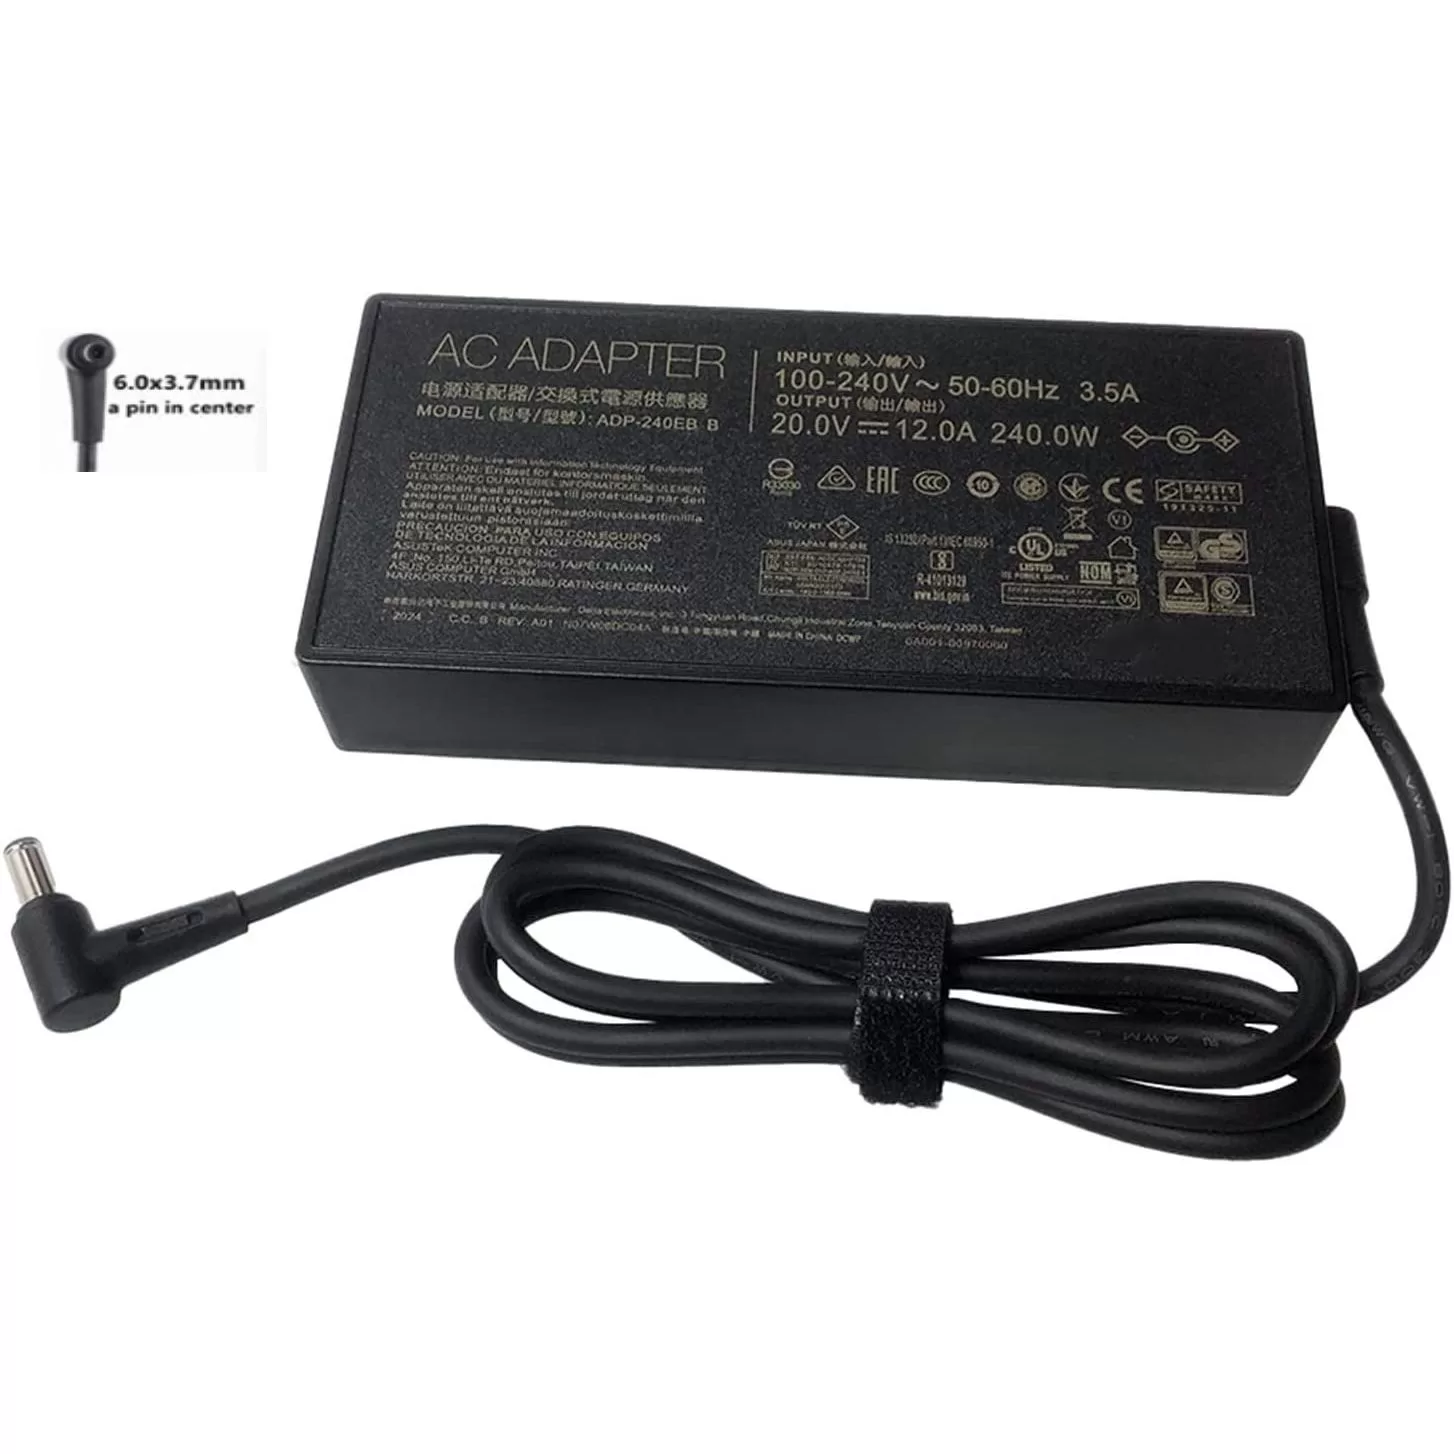 Original Adapter Charger Asus 20V 12A 240W 6.0×3.7mm Adapters 3